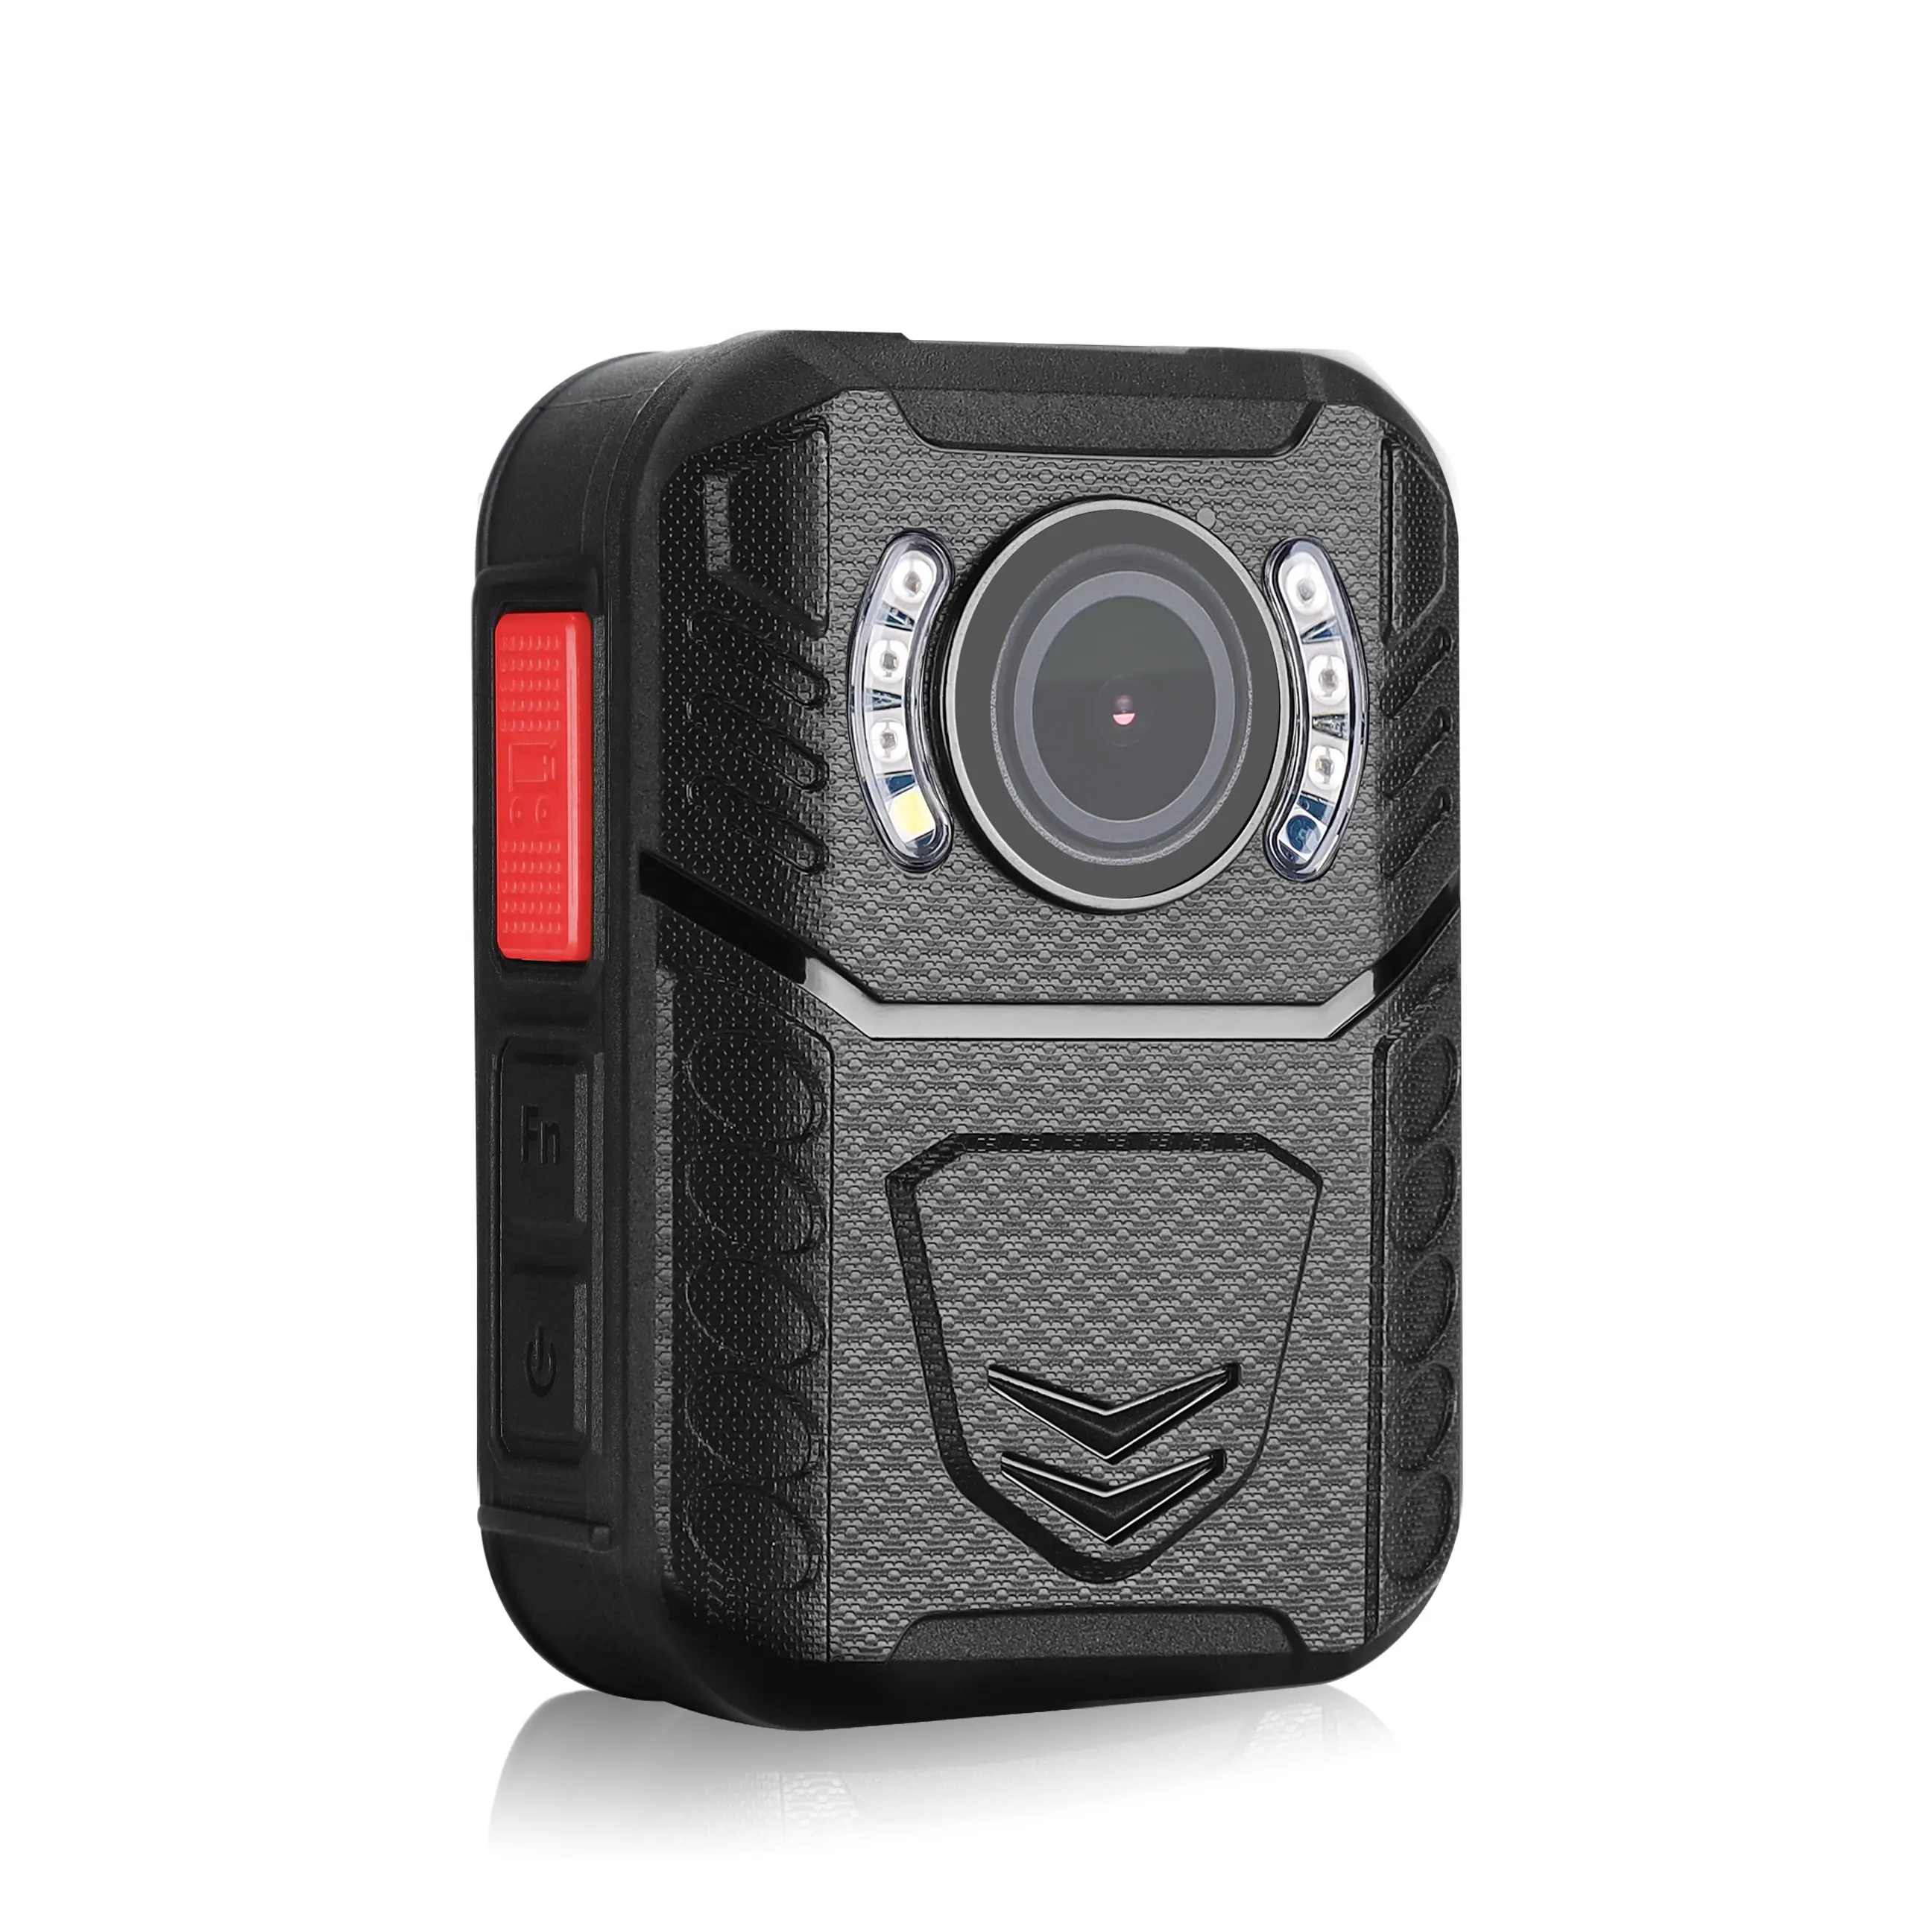 New Arrival FHD Smart Compact Portable with Infrared Night Vision Motion Detection Sport Mini Body Camera